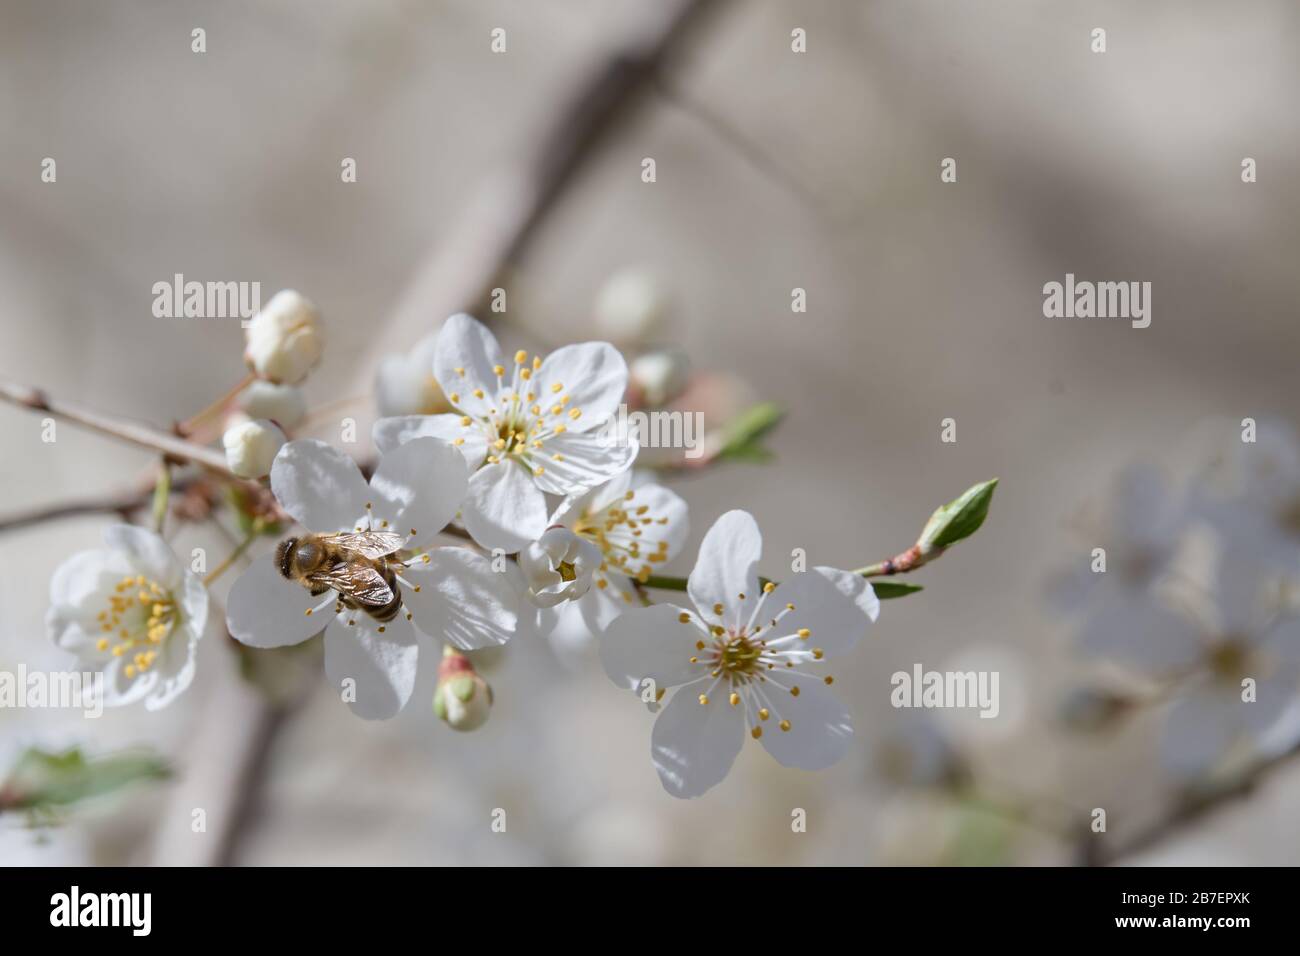 A European honey bee (Apis mellifera) harvesting pollen from a blossoming apricot tree (Prunus armeniaca) displaying its delicate white flowers, by a Stock Photo